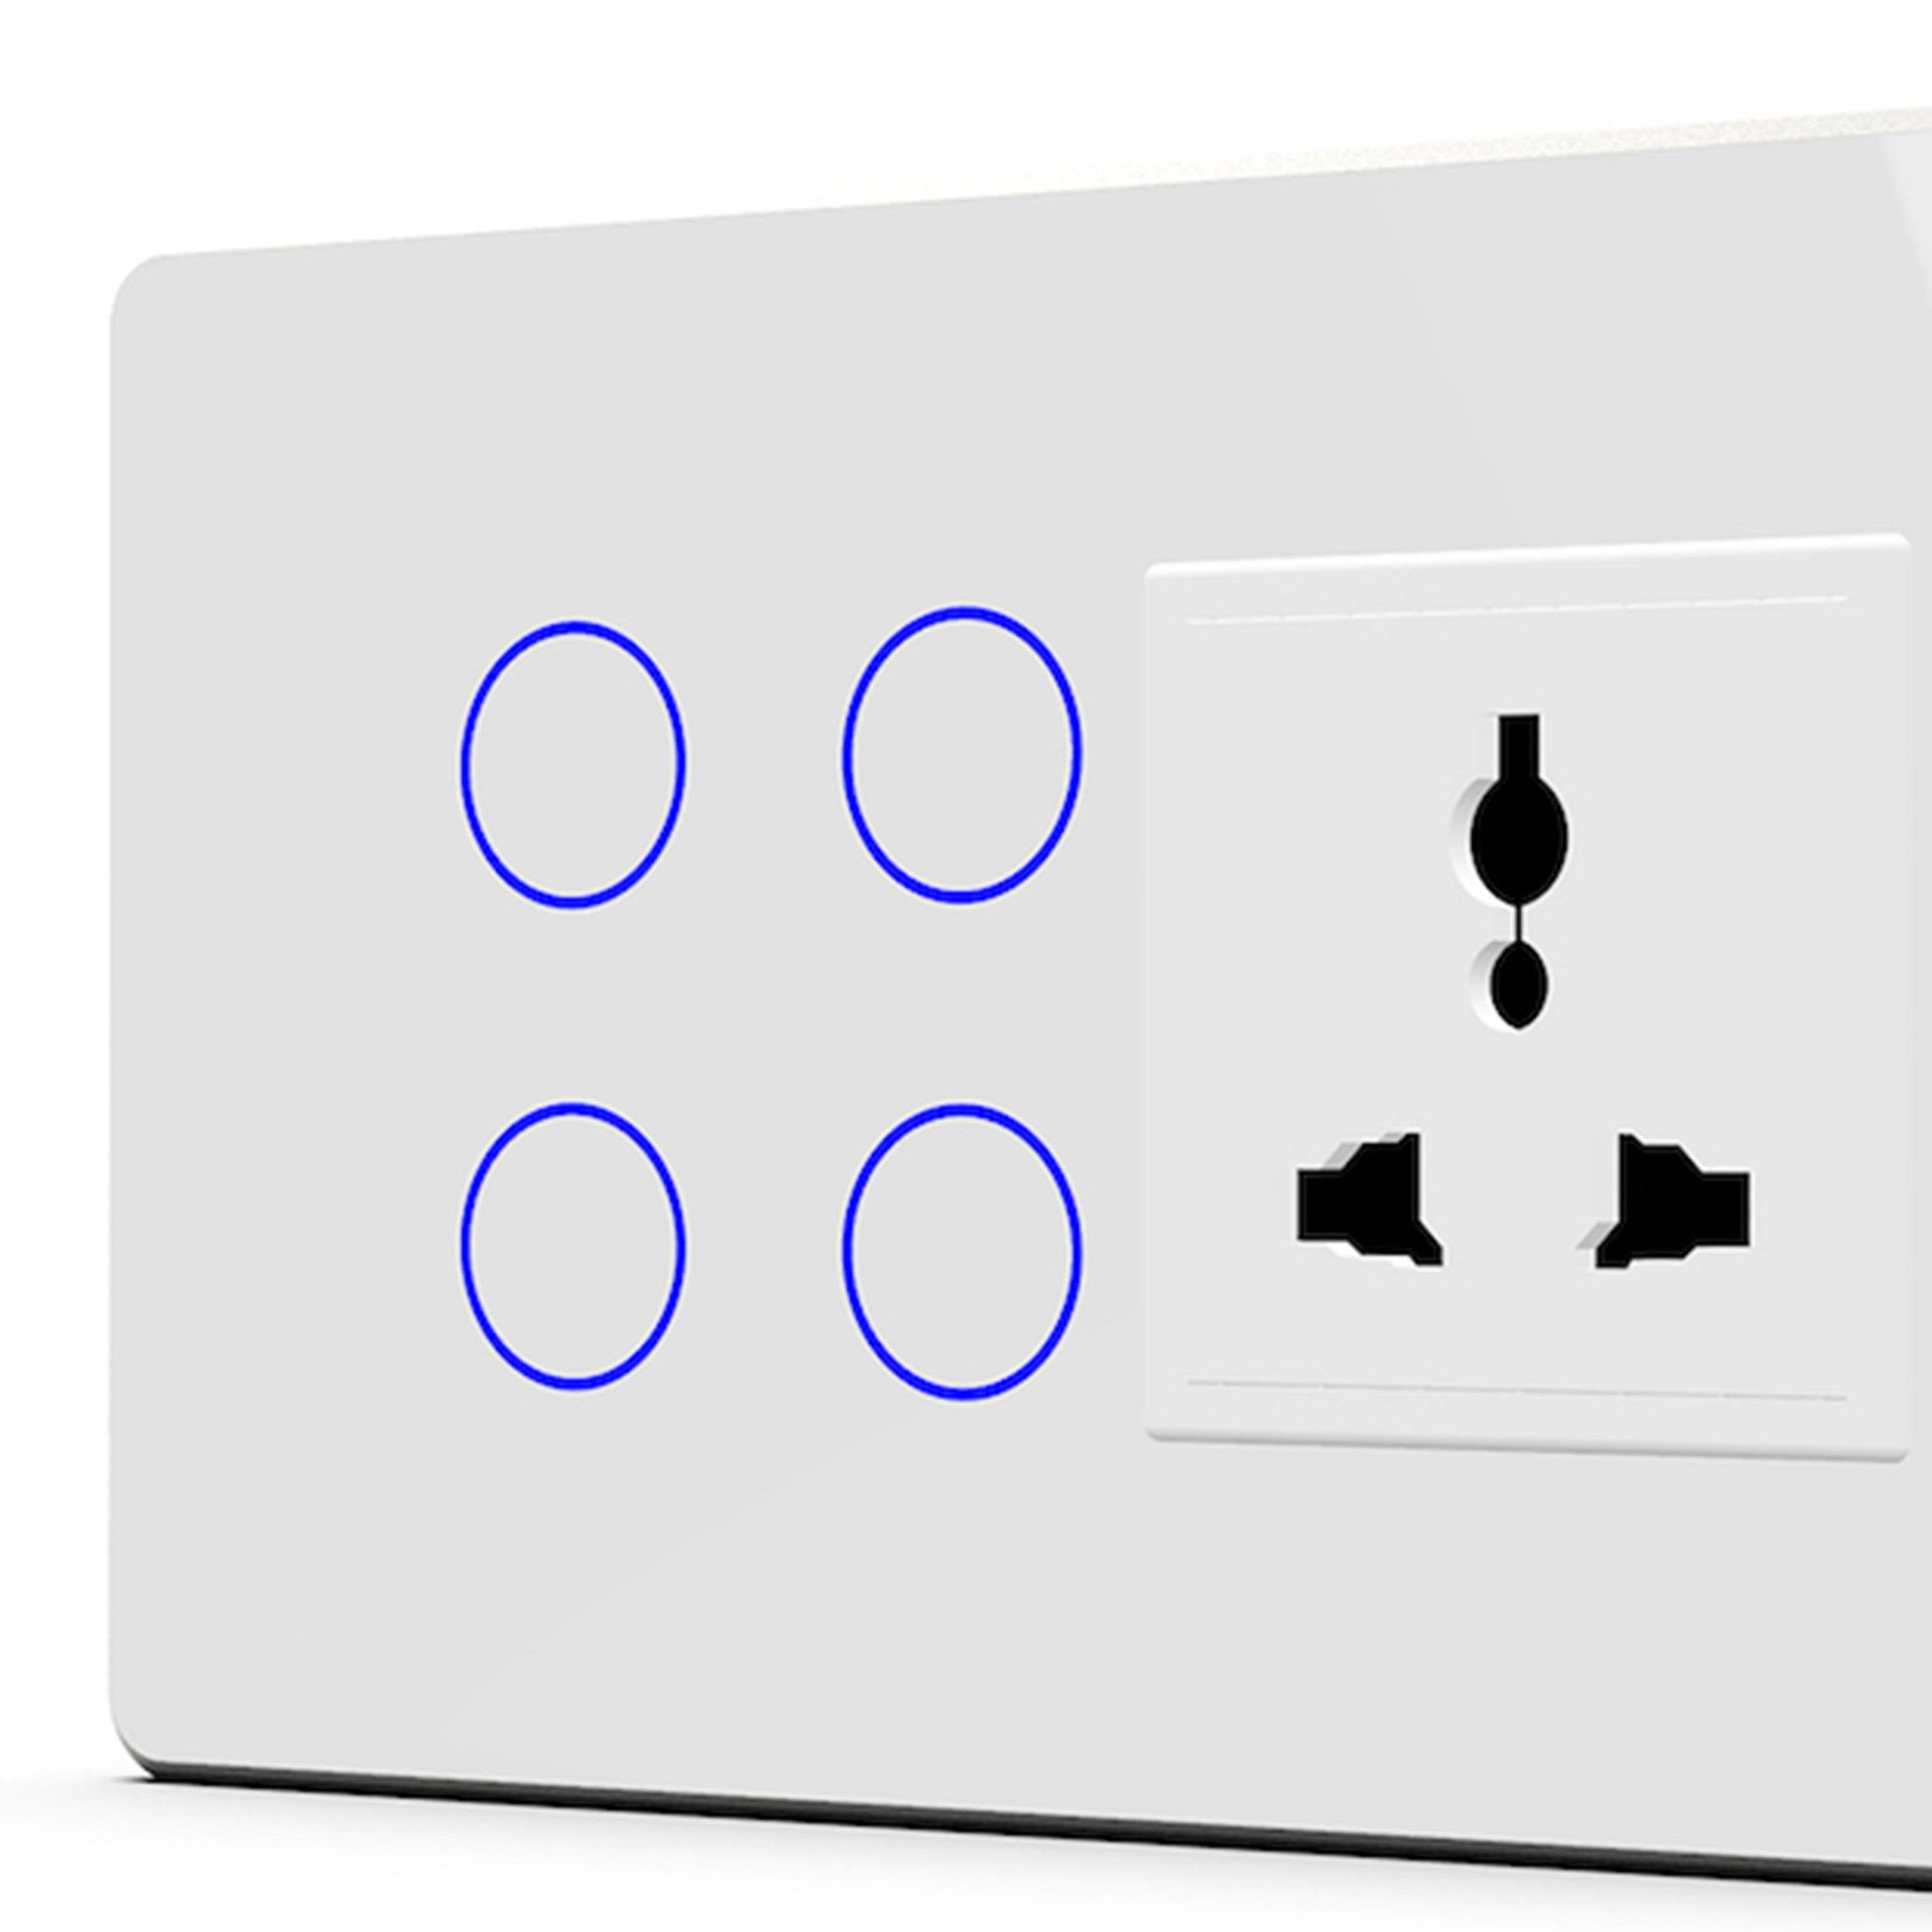 HOGAR SMART 4+1 TOUCH SWITCH PANELS WITH BUILT-IN AUTOMATION - Ankur Lighting